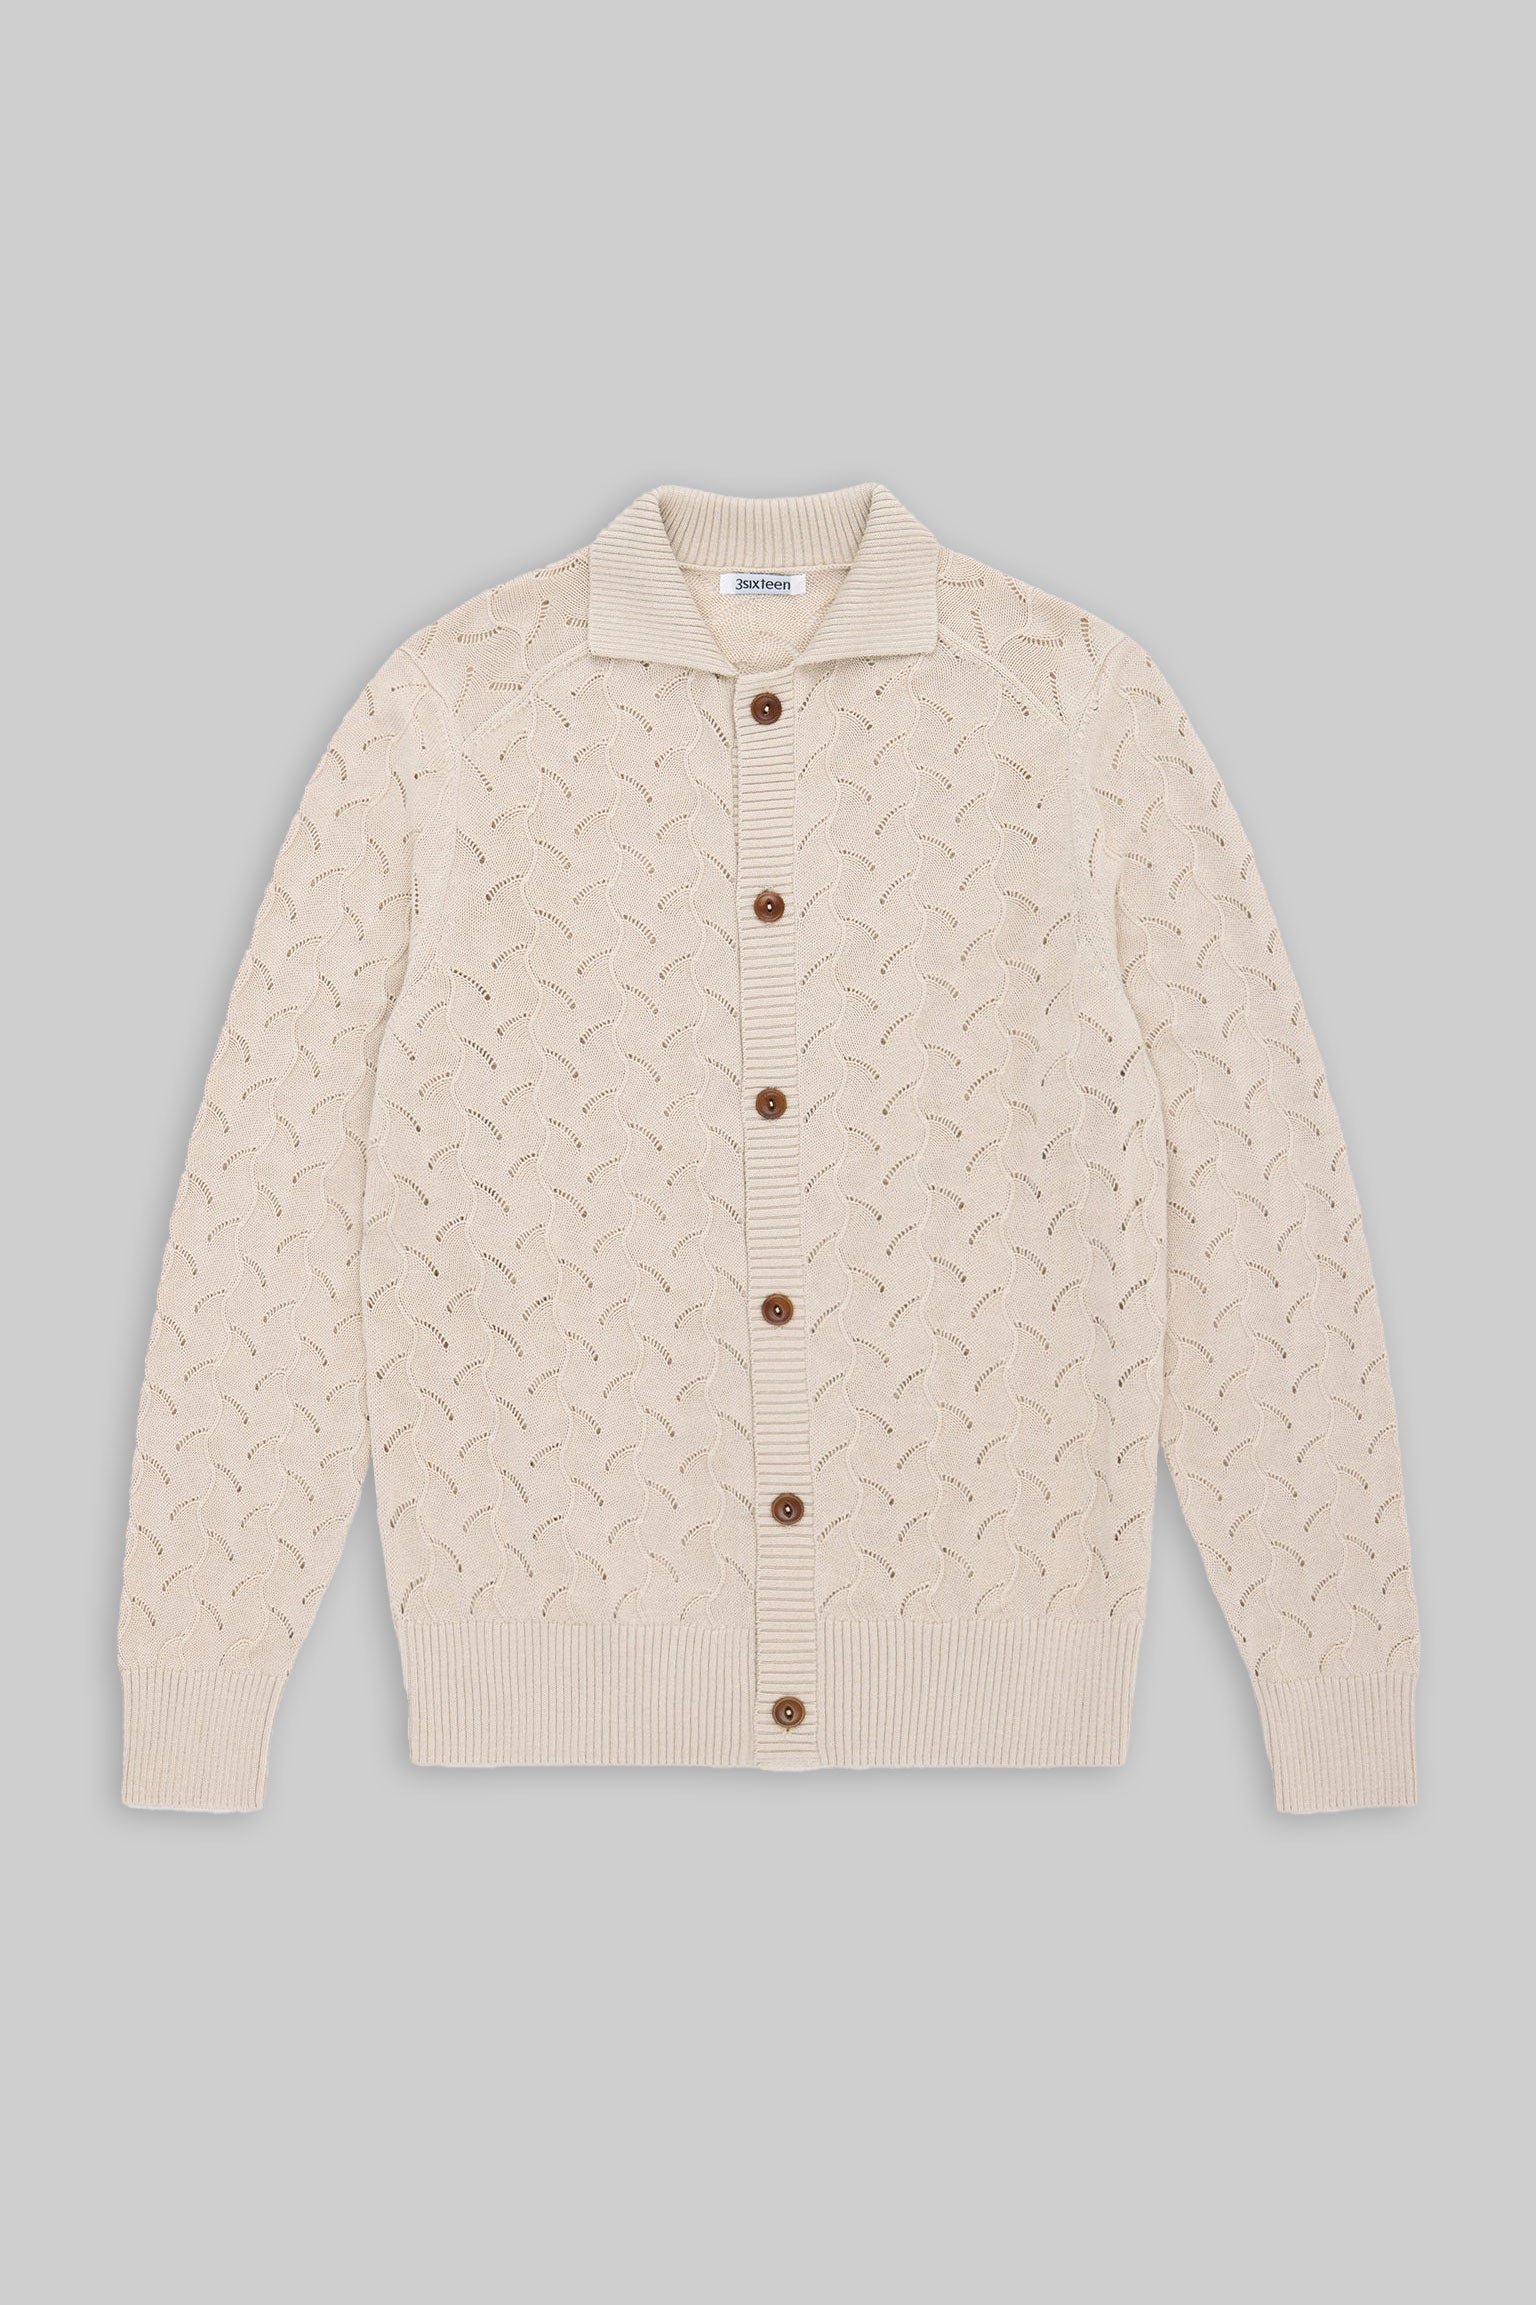 3Sixteen Collared Cardigan (Natural Lace Knit)